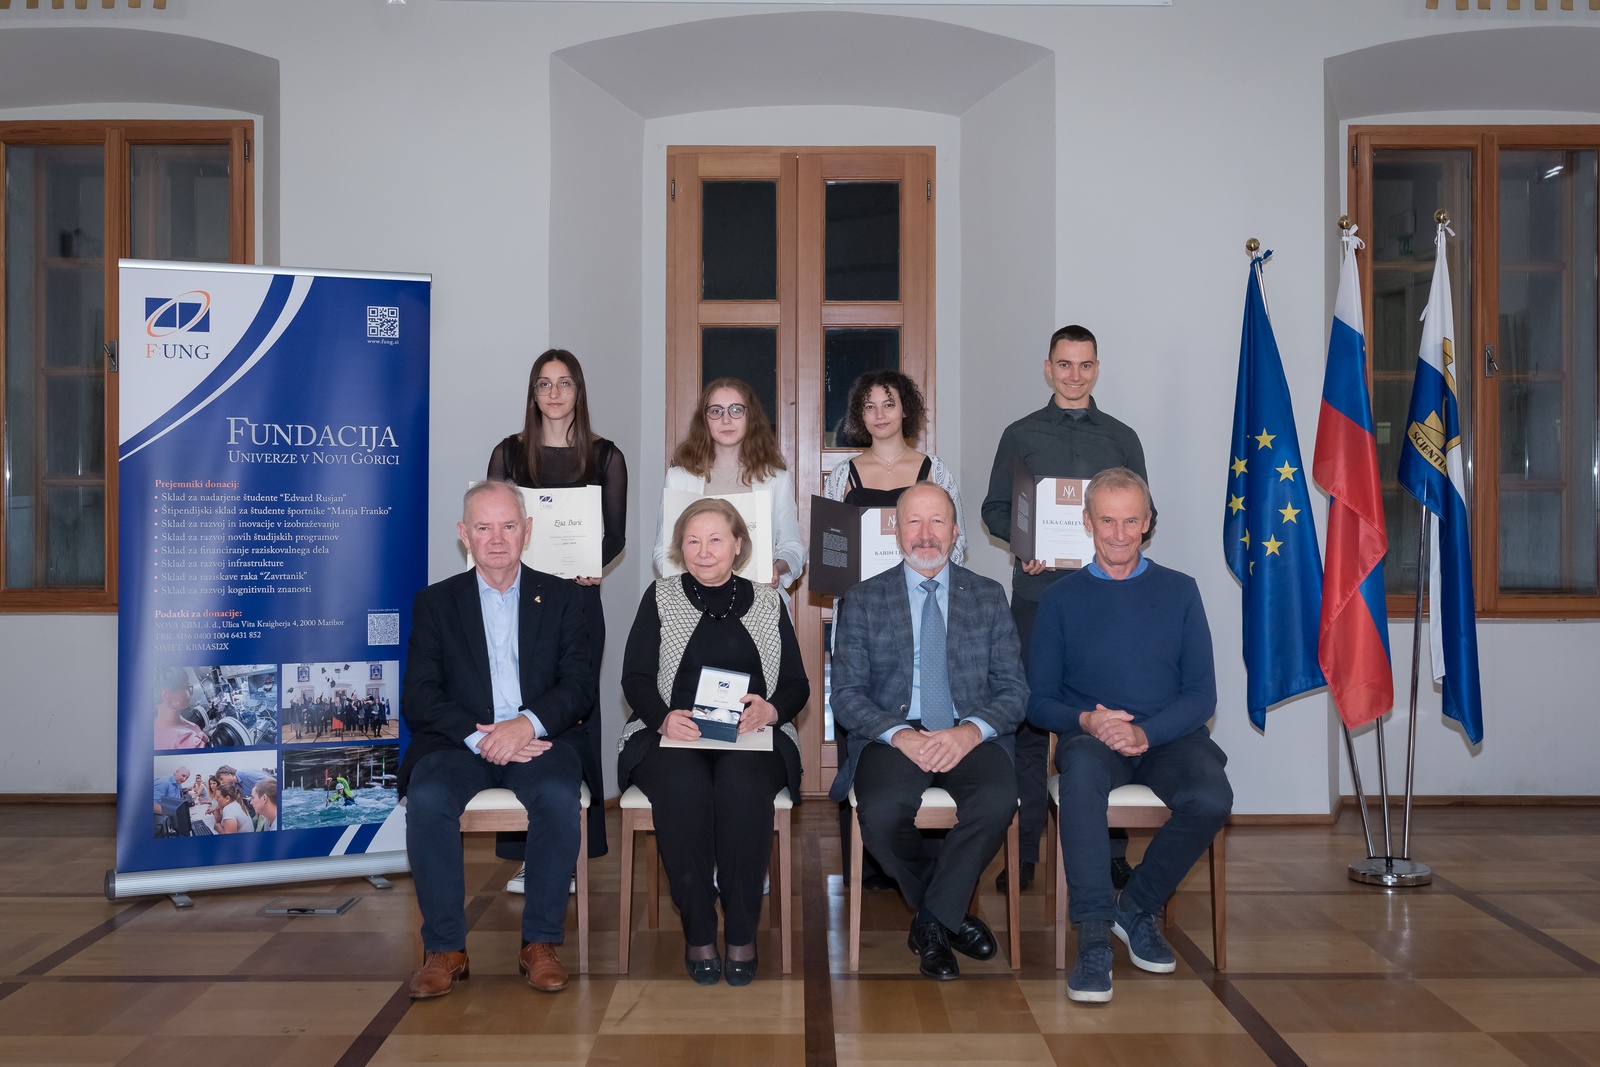 Awardees, Management of the University of Nova Gorica Foundation and Honorary Rector of the University of Nova Gorica. Photo: Miha Godec